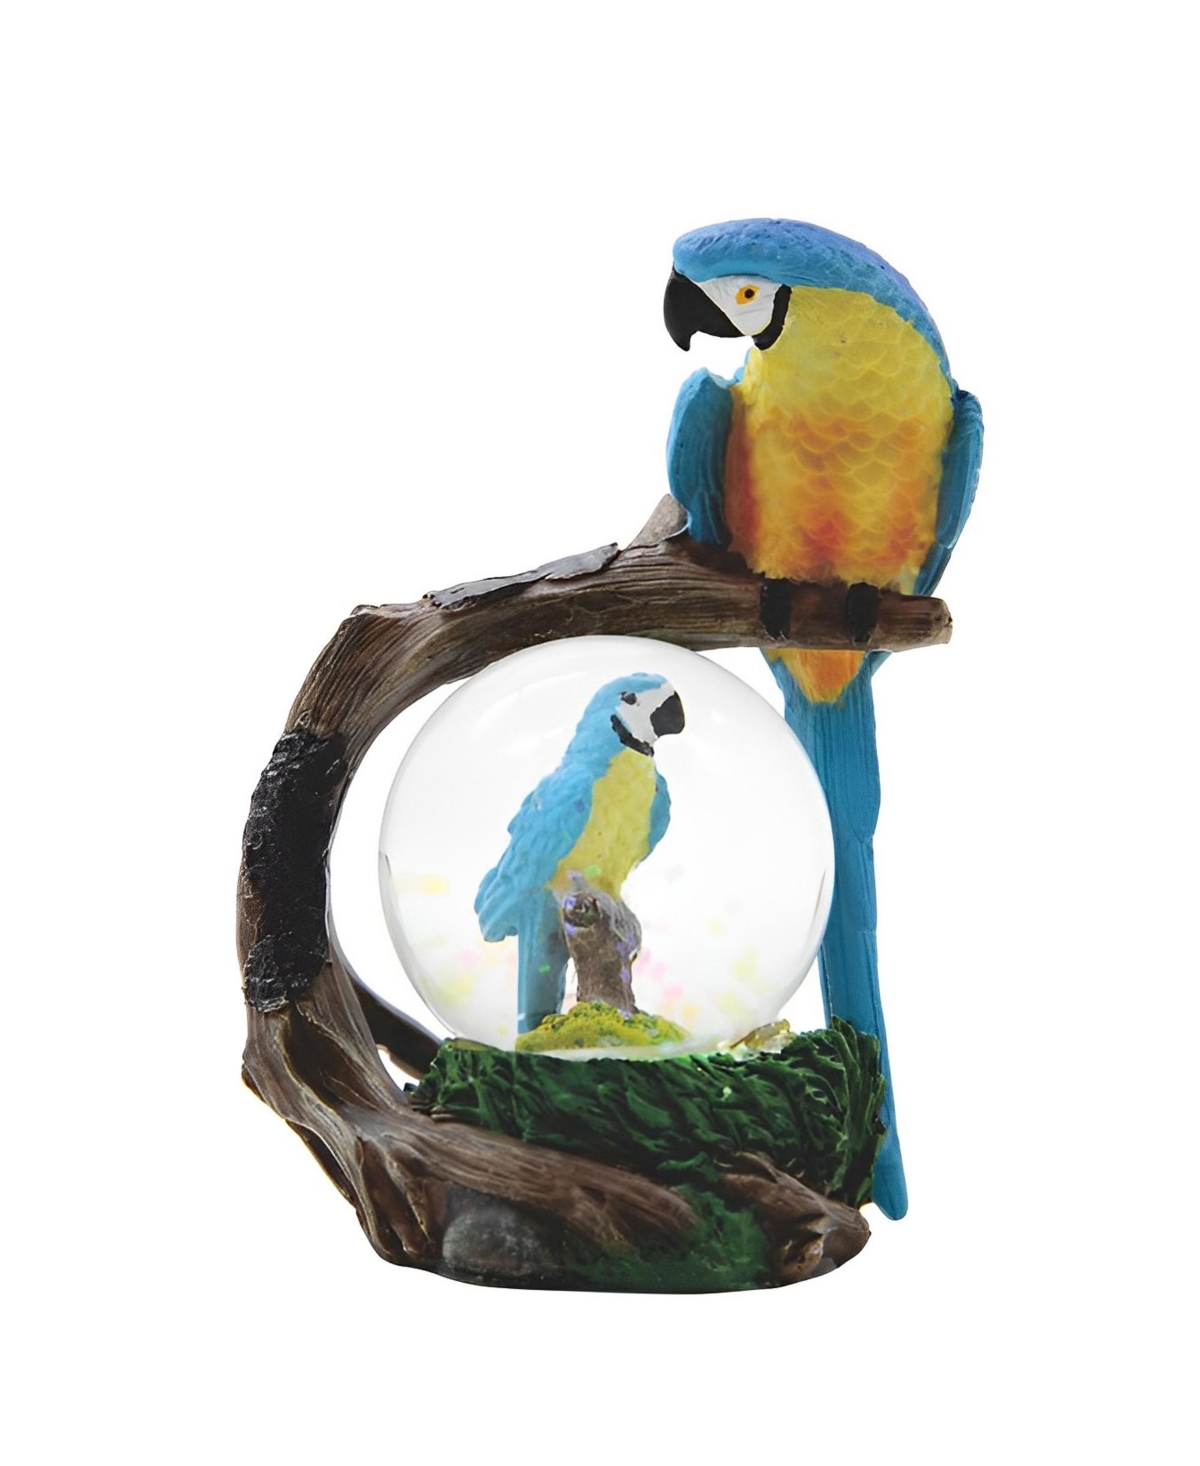 4.25"H Blue Parrot Glitter Snow Globe Figurine Home Decor Perfect Gift for House Warming, Holidays and Birthdays - Multicolor